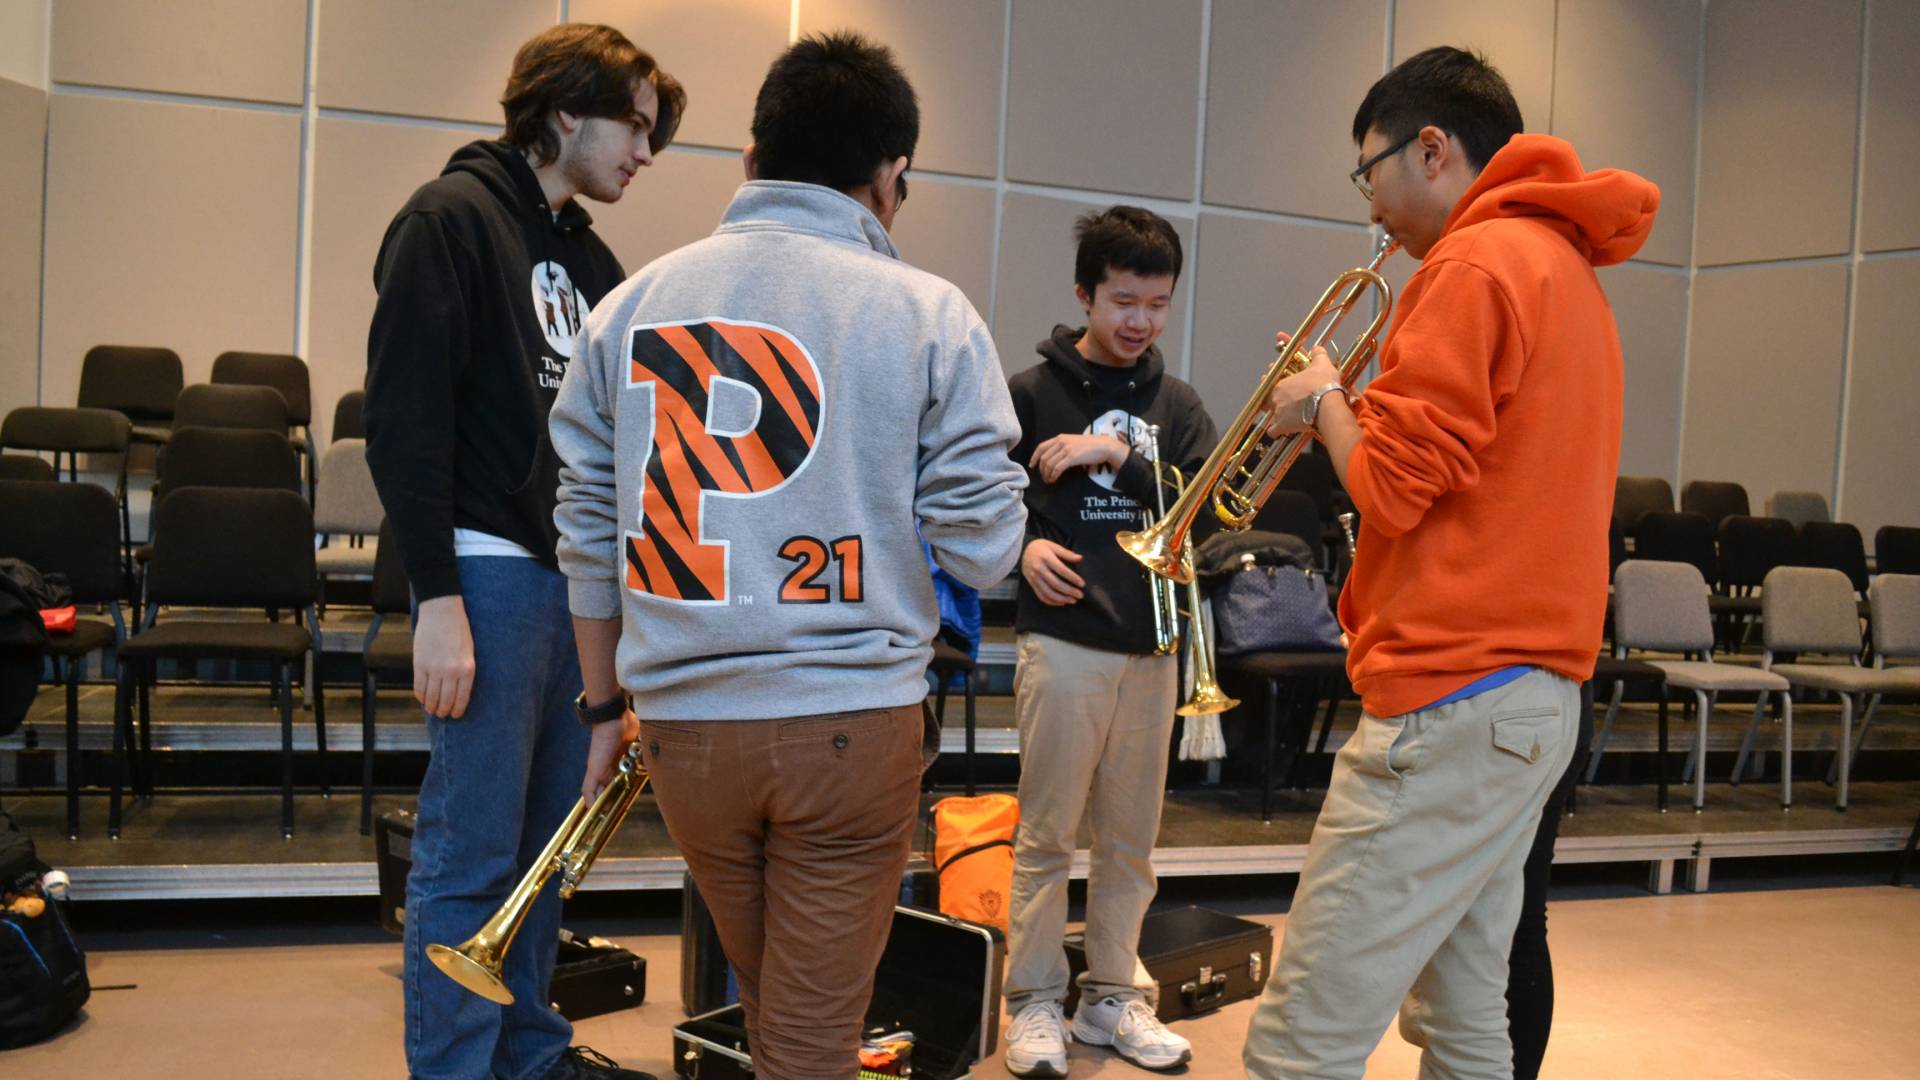 Students with wind instruments during Learn to Play an Instrument with the Band class